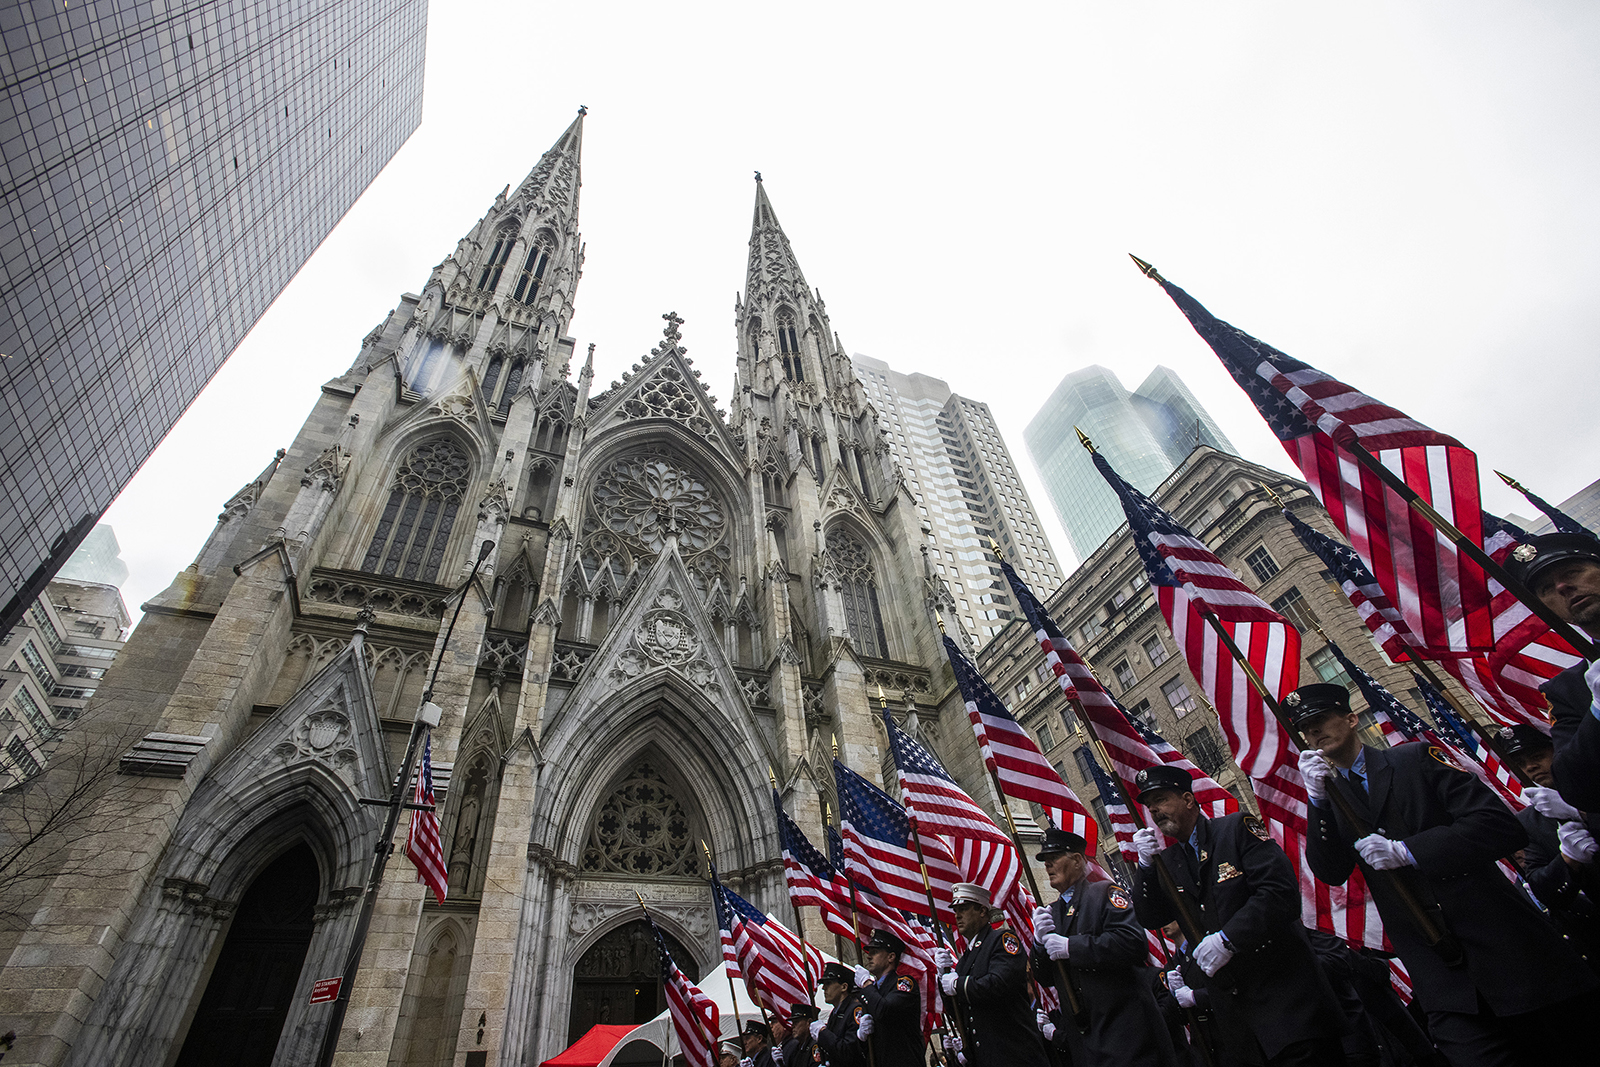 New York Fire Department Officers march up Fifth Avenue while they pass in front of St. Patrick's Cathedral during the St. Patrick's Day Parade, Thursday, March 17, 2022, in New York. (AP Photo/Eduardo Munoz Alvarez)